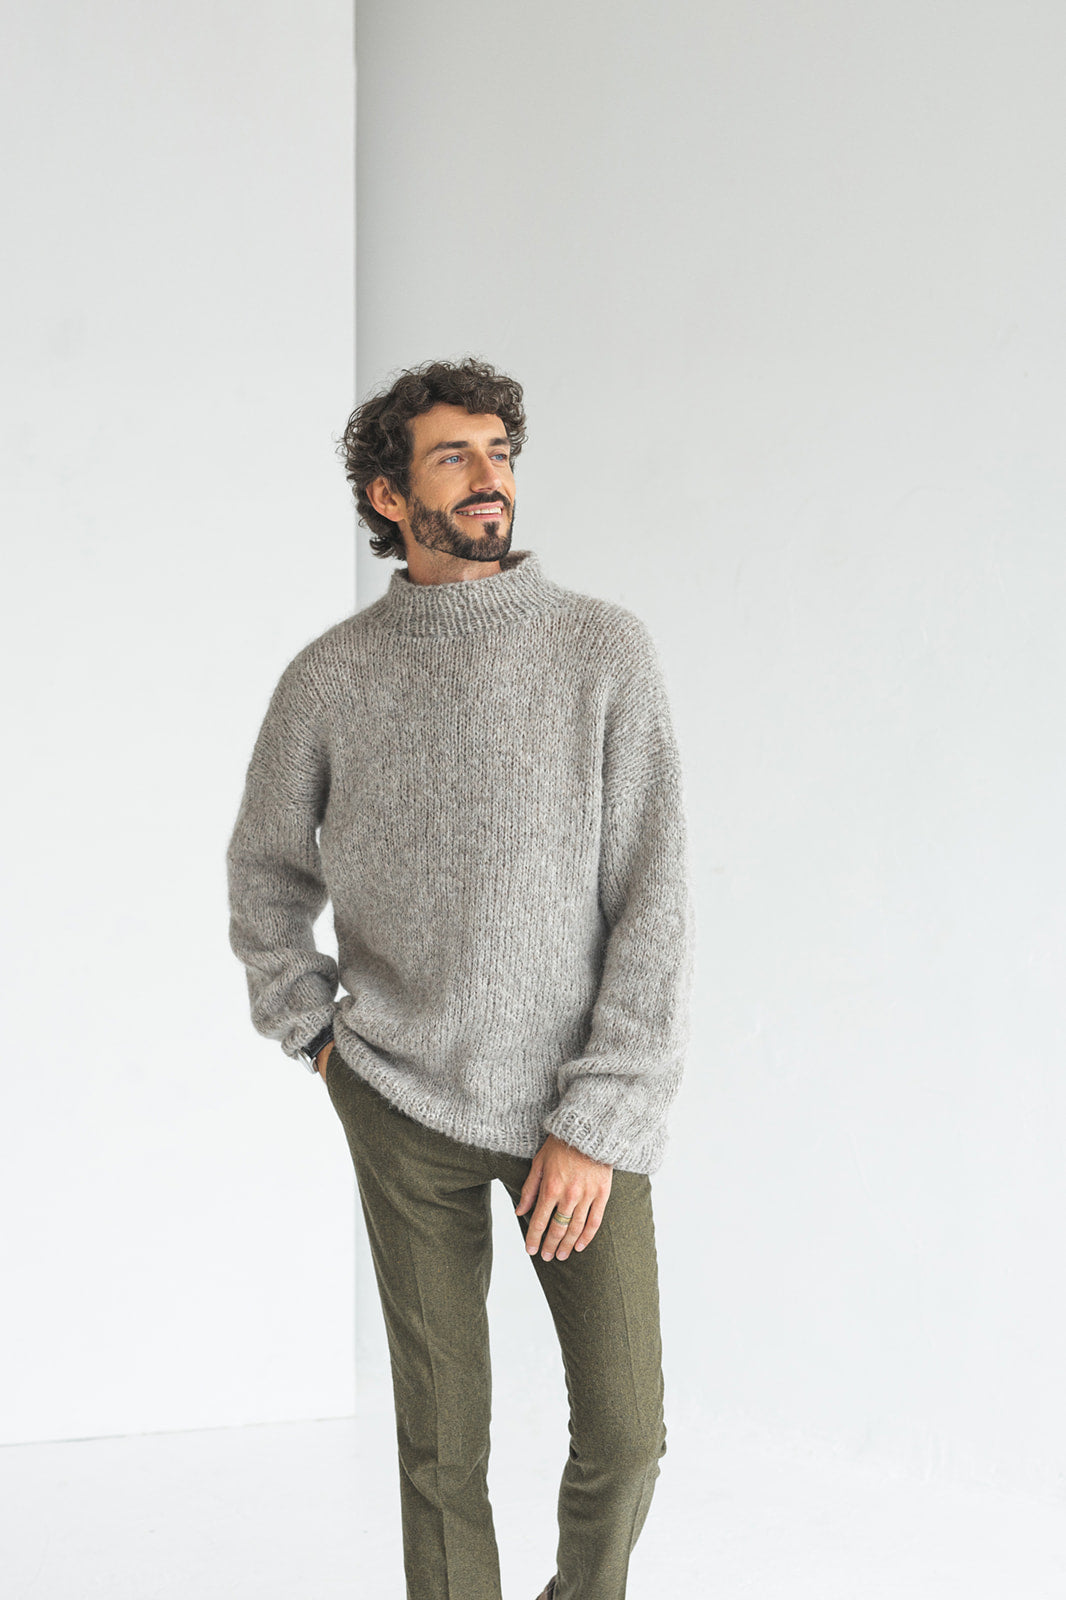 Chunky knit light gray alpaca wool sweater for men, grey cable knitted men's jumper, handmade thick winter minimalist pullover, gift for man